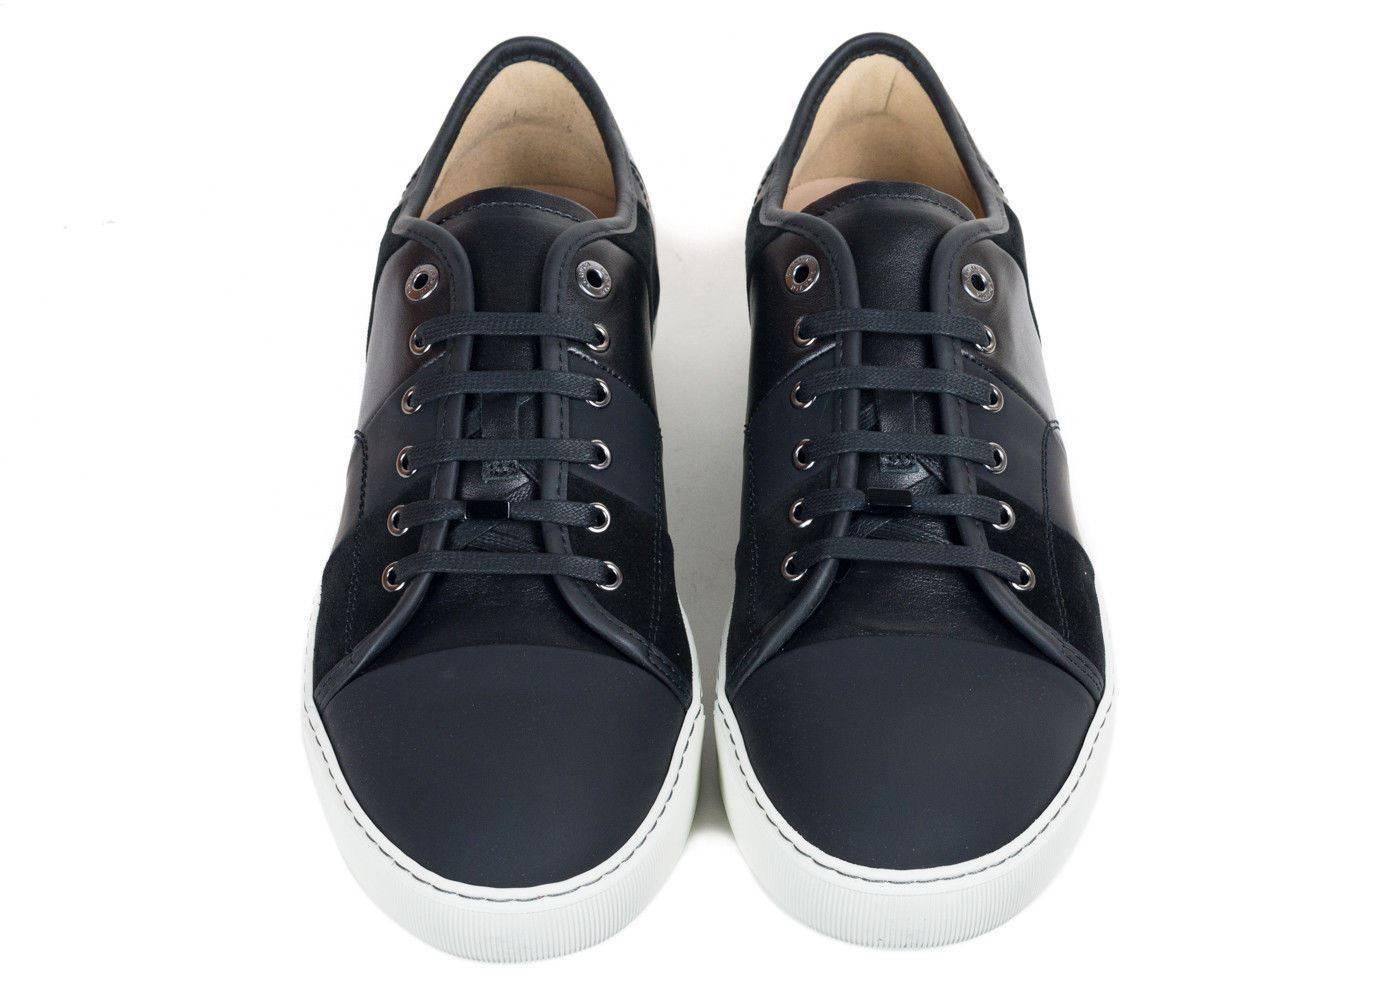 Brand New In Original Box
Retails Online and In-stores for $565
Size UK 10/ US 11 Fits True to Size

The Lanvin Vertical Striped Sneaker is truly on of a kind. These sleek leather inserts paired with the smooth cap toe style gives your shoe an